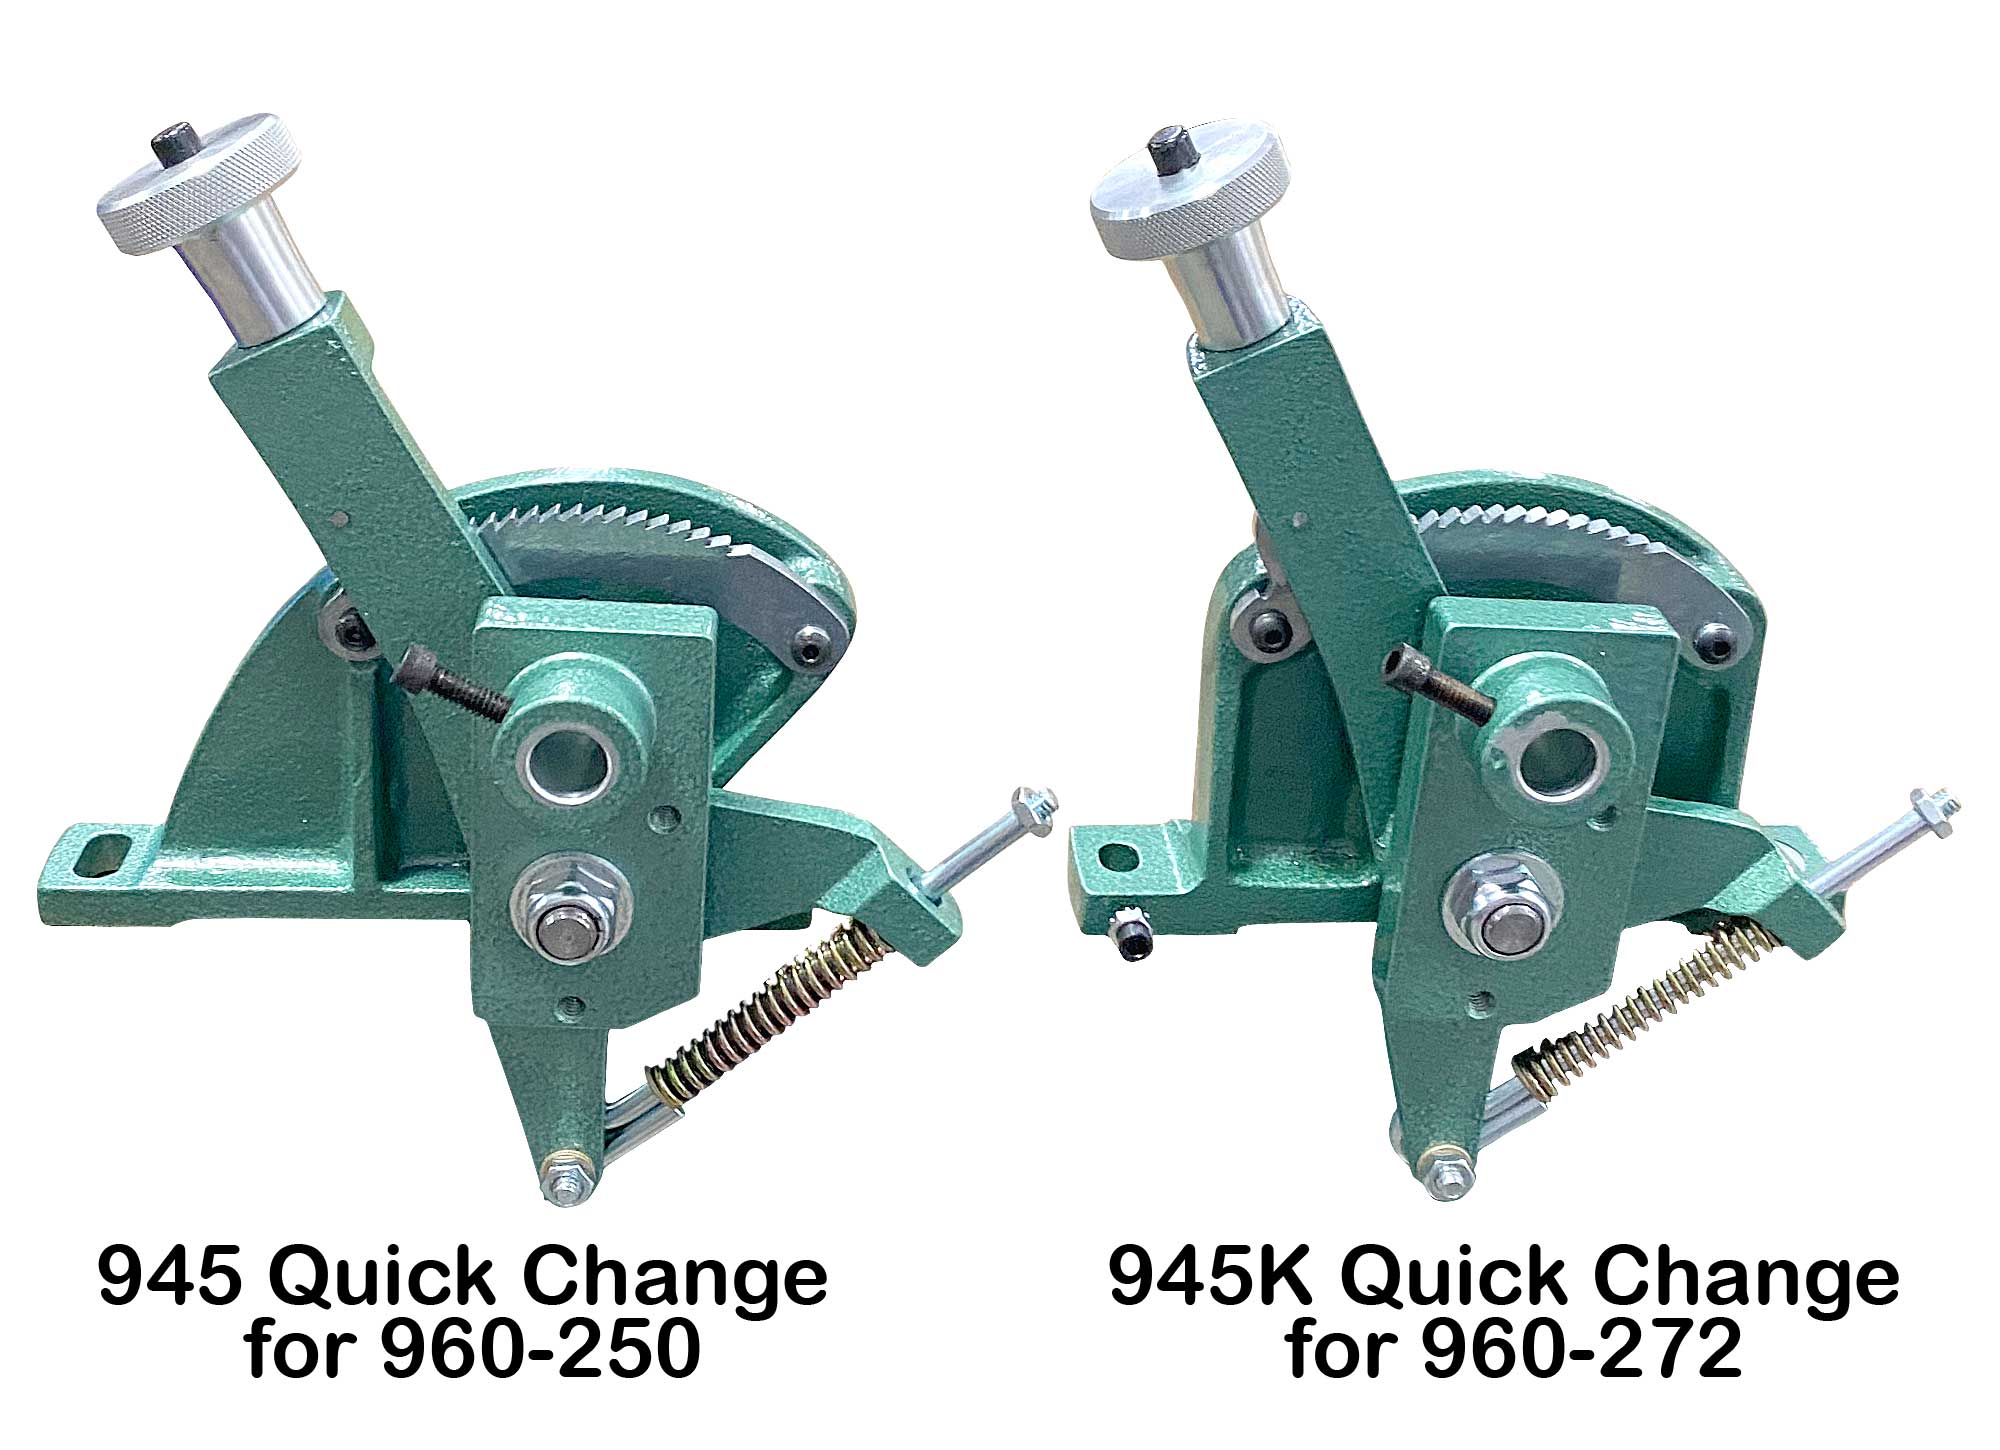 Make sure you order the right part.   The 945 and the 945K are not the same part.